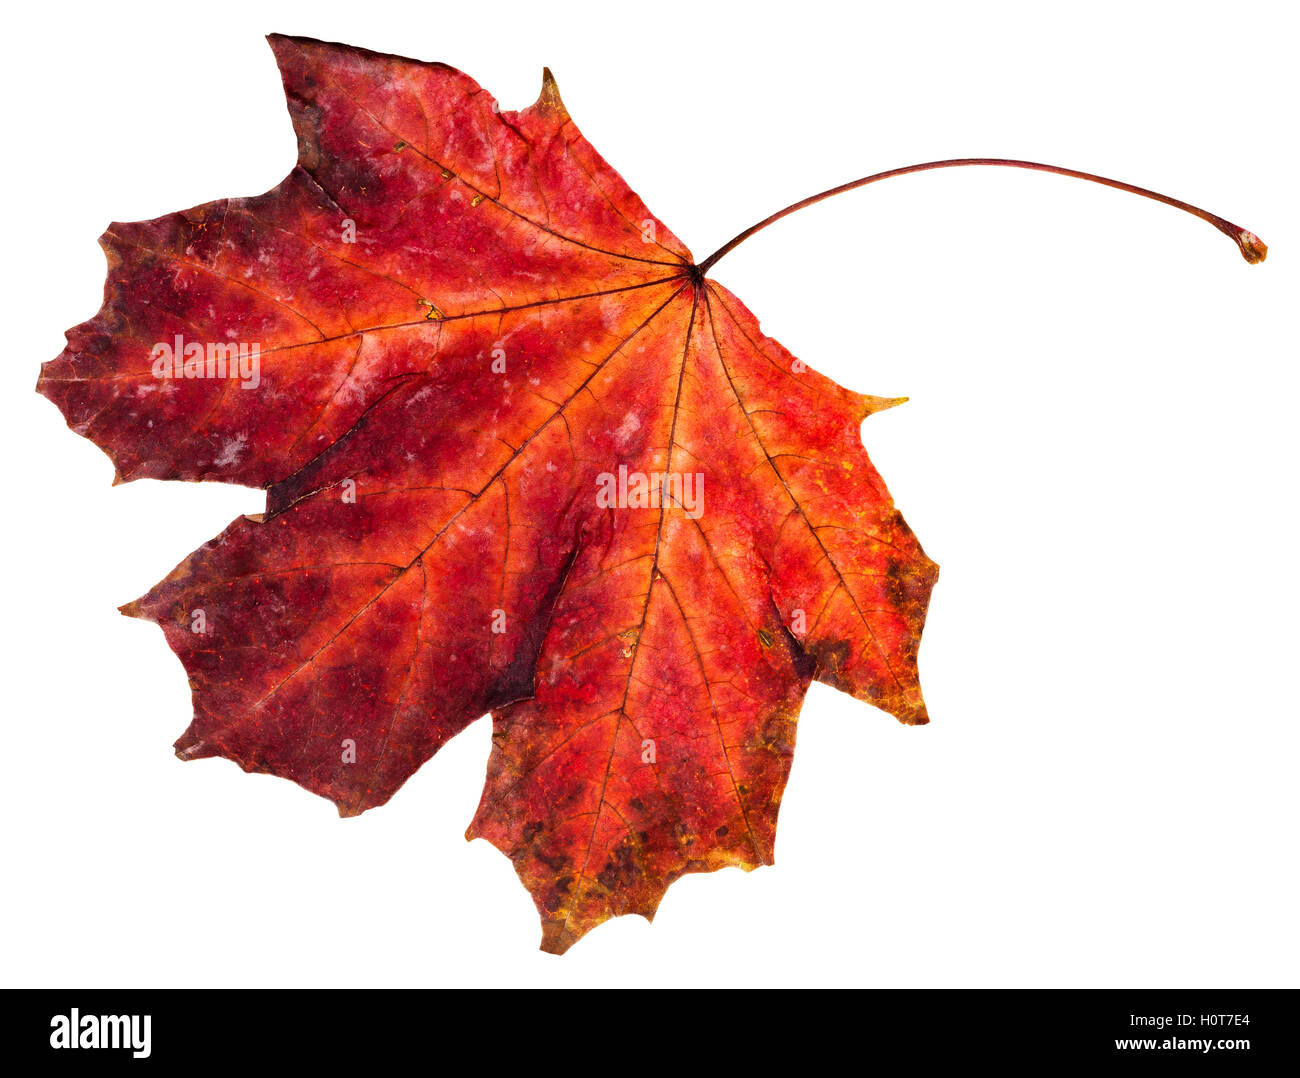 red fallen leaf of maple tree (Acer platanoides, Norway maple) isolated on white background Stock Photo